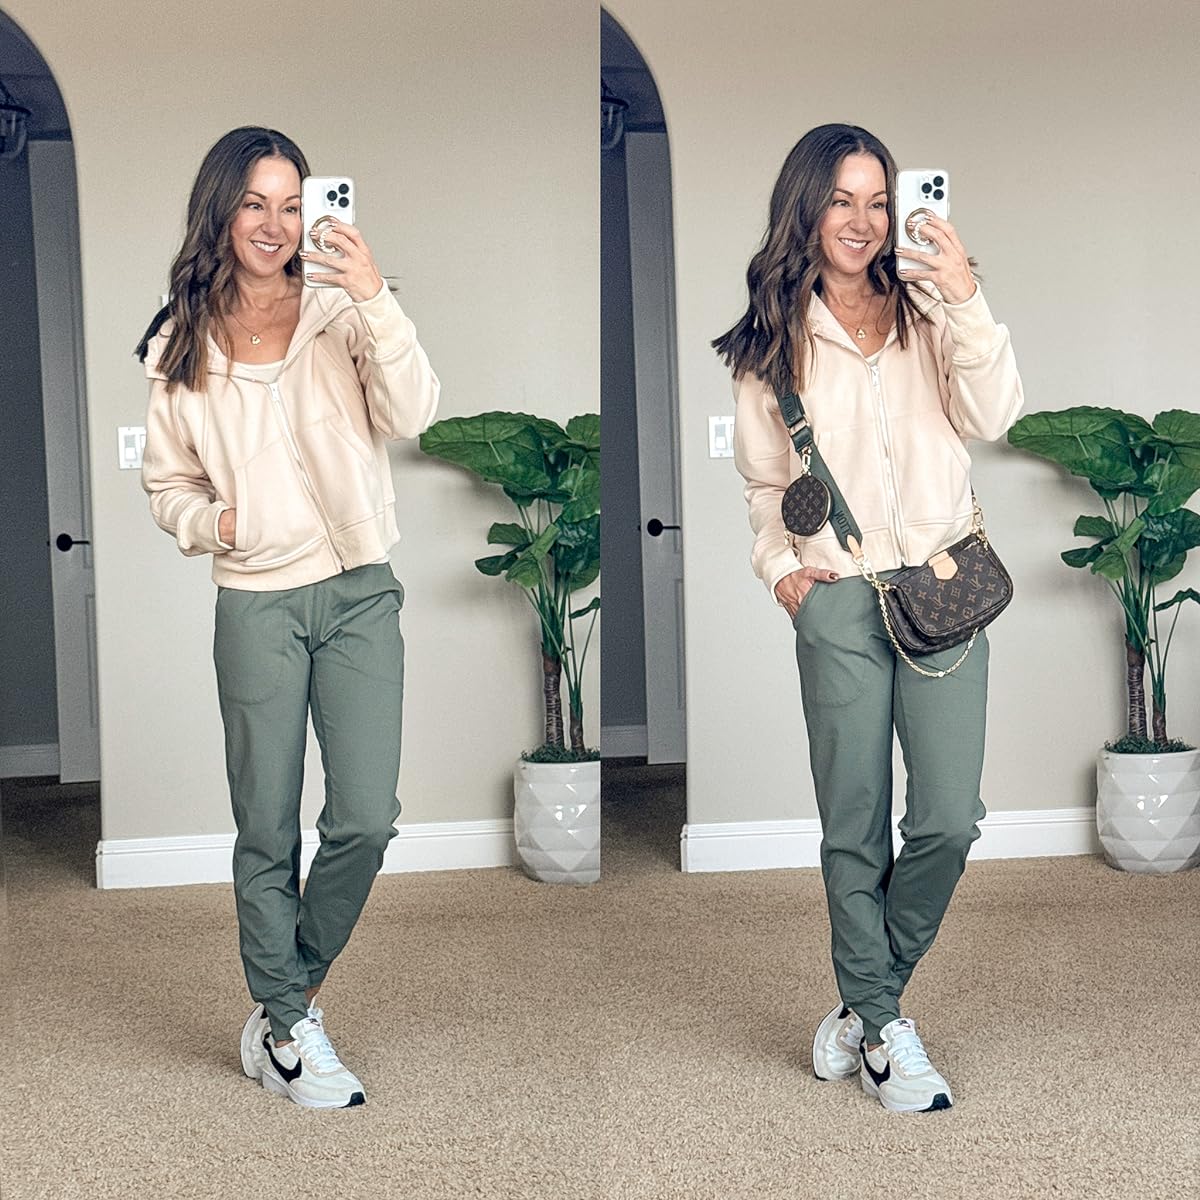 trendy and comfy athleisure styles that you need | #trendy #comfy #athleisure #athletic #joggers #sweatshirts #sneakers #casual #neutral #purse #seamless #pockets #running #exercise